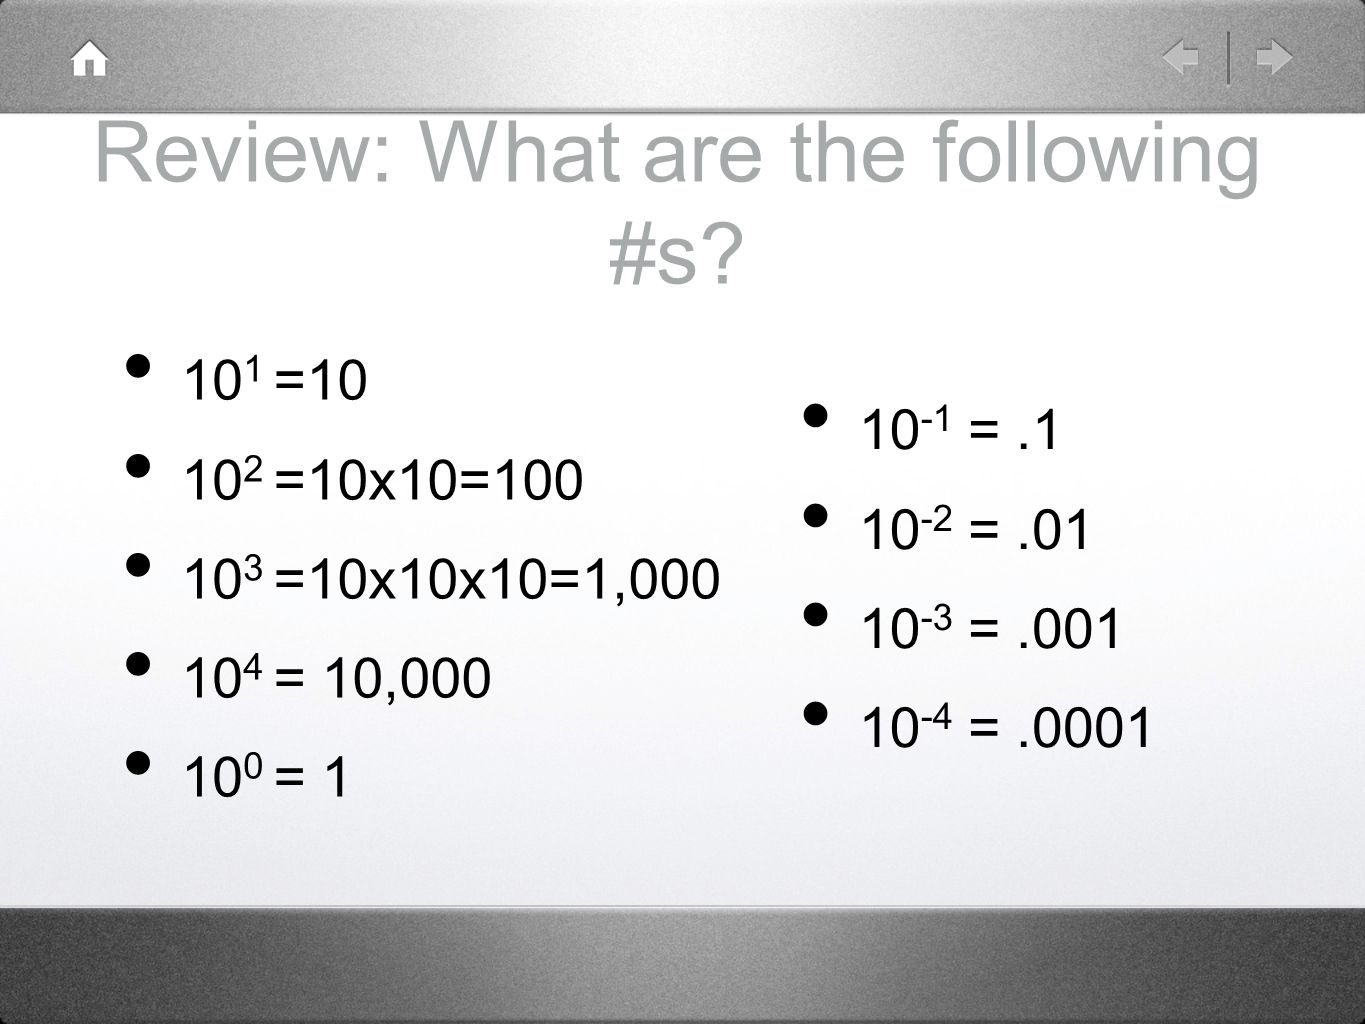 Review: What are the following #s